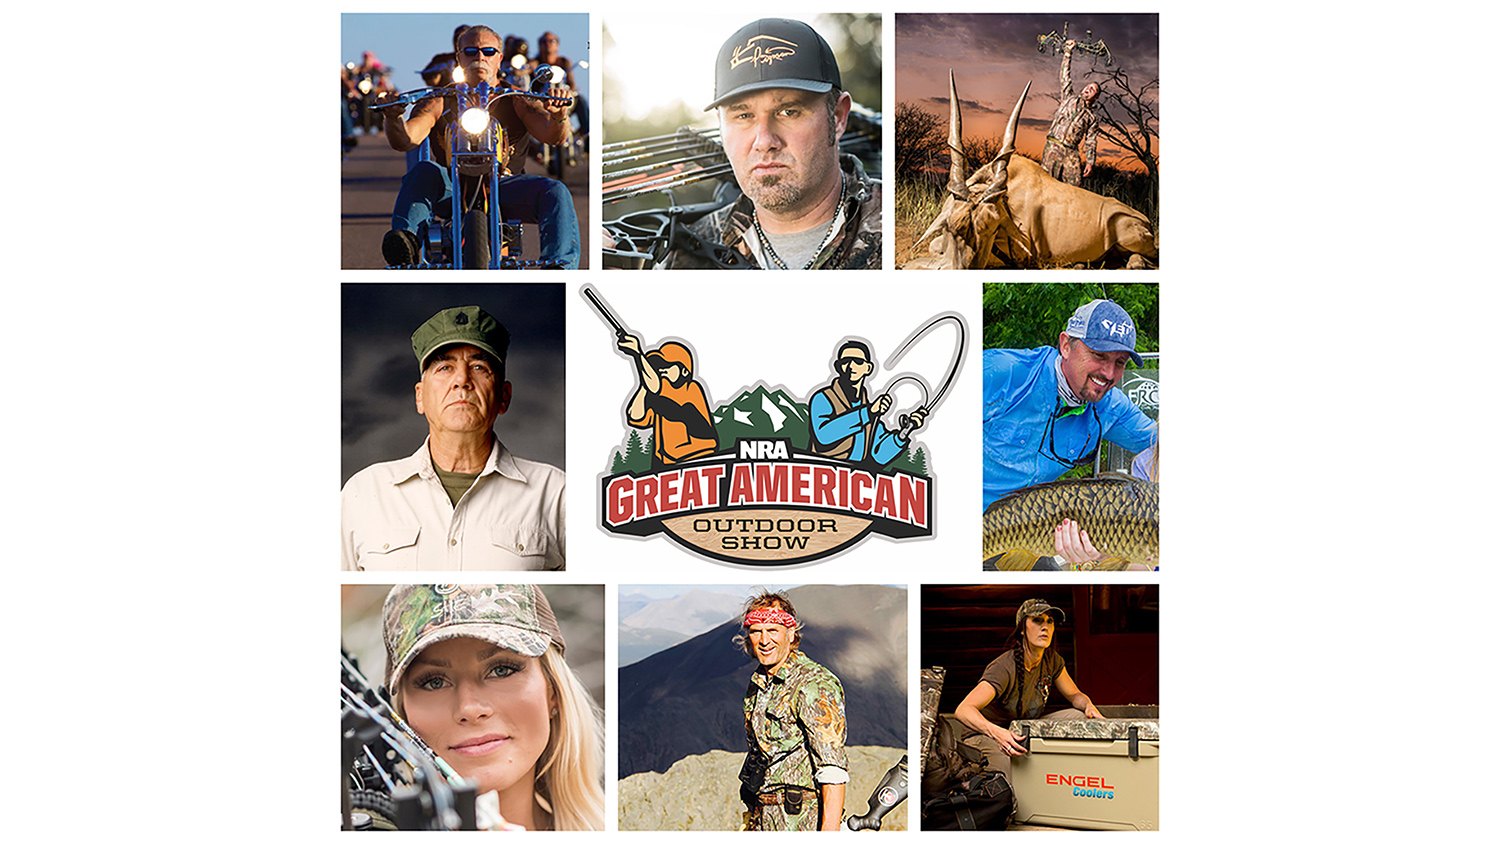 Can't Miss Celebrities at the 2017 Great American Outdoor Show